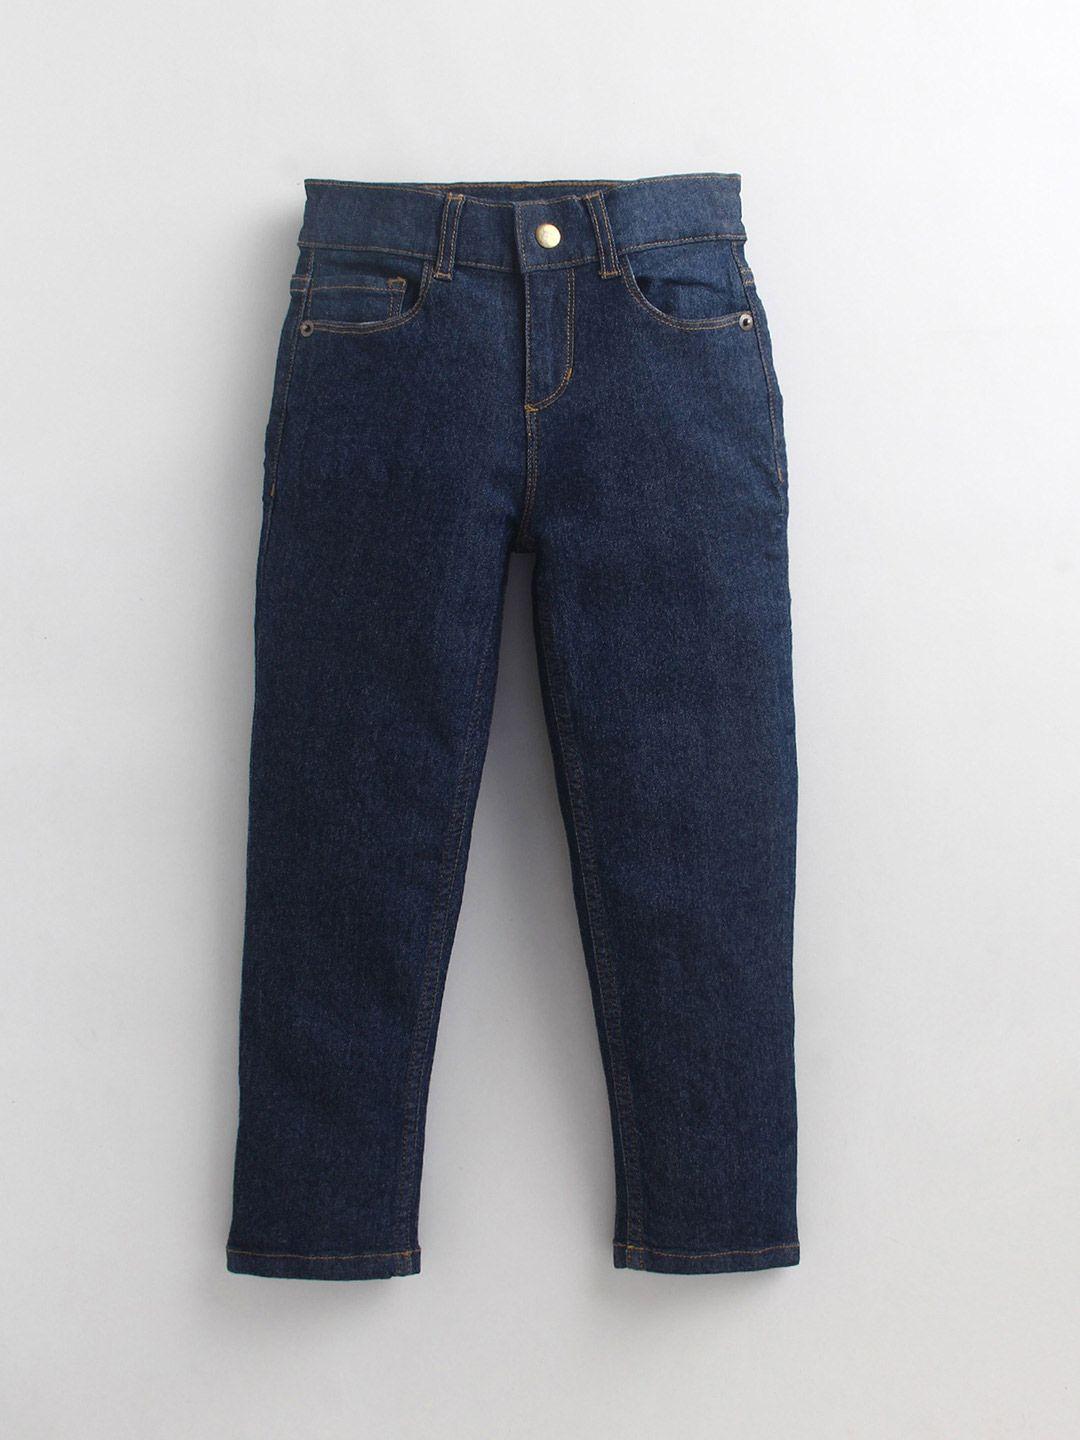 cherry crumble boys blue washed denim jeans